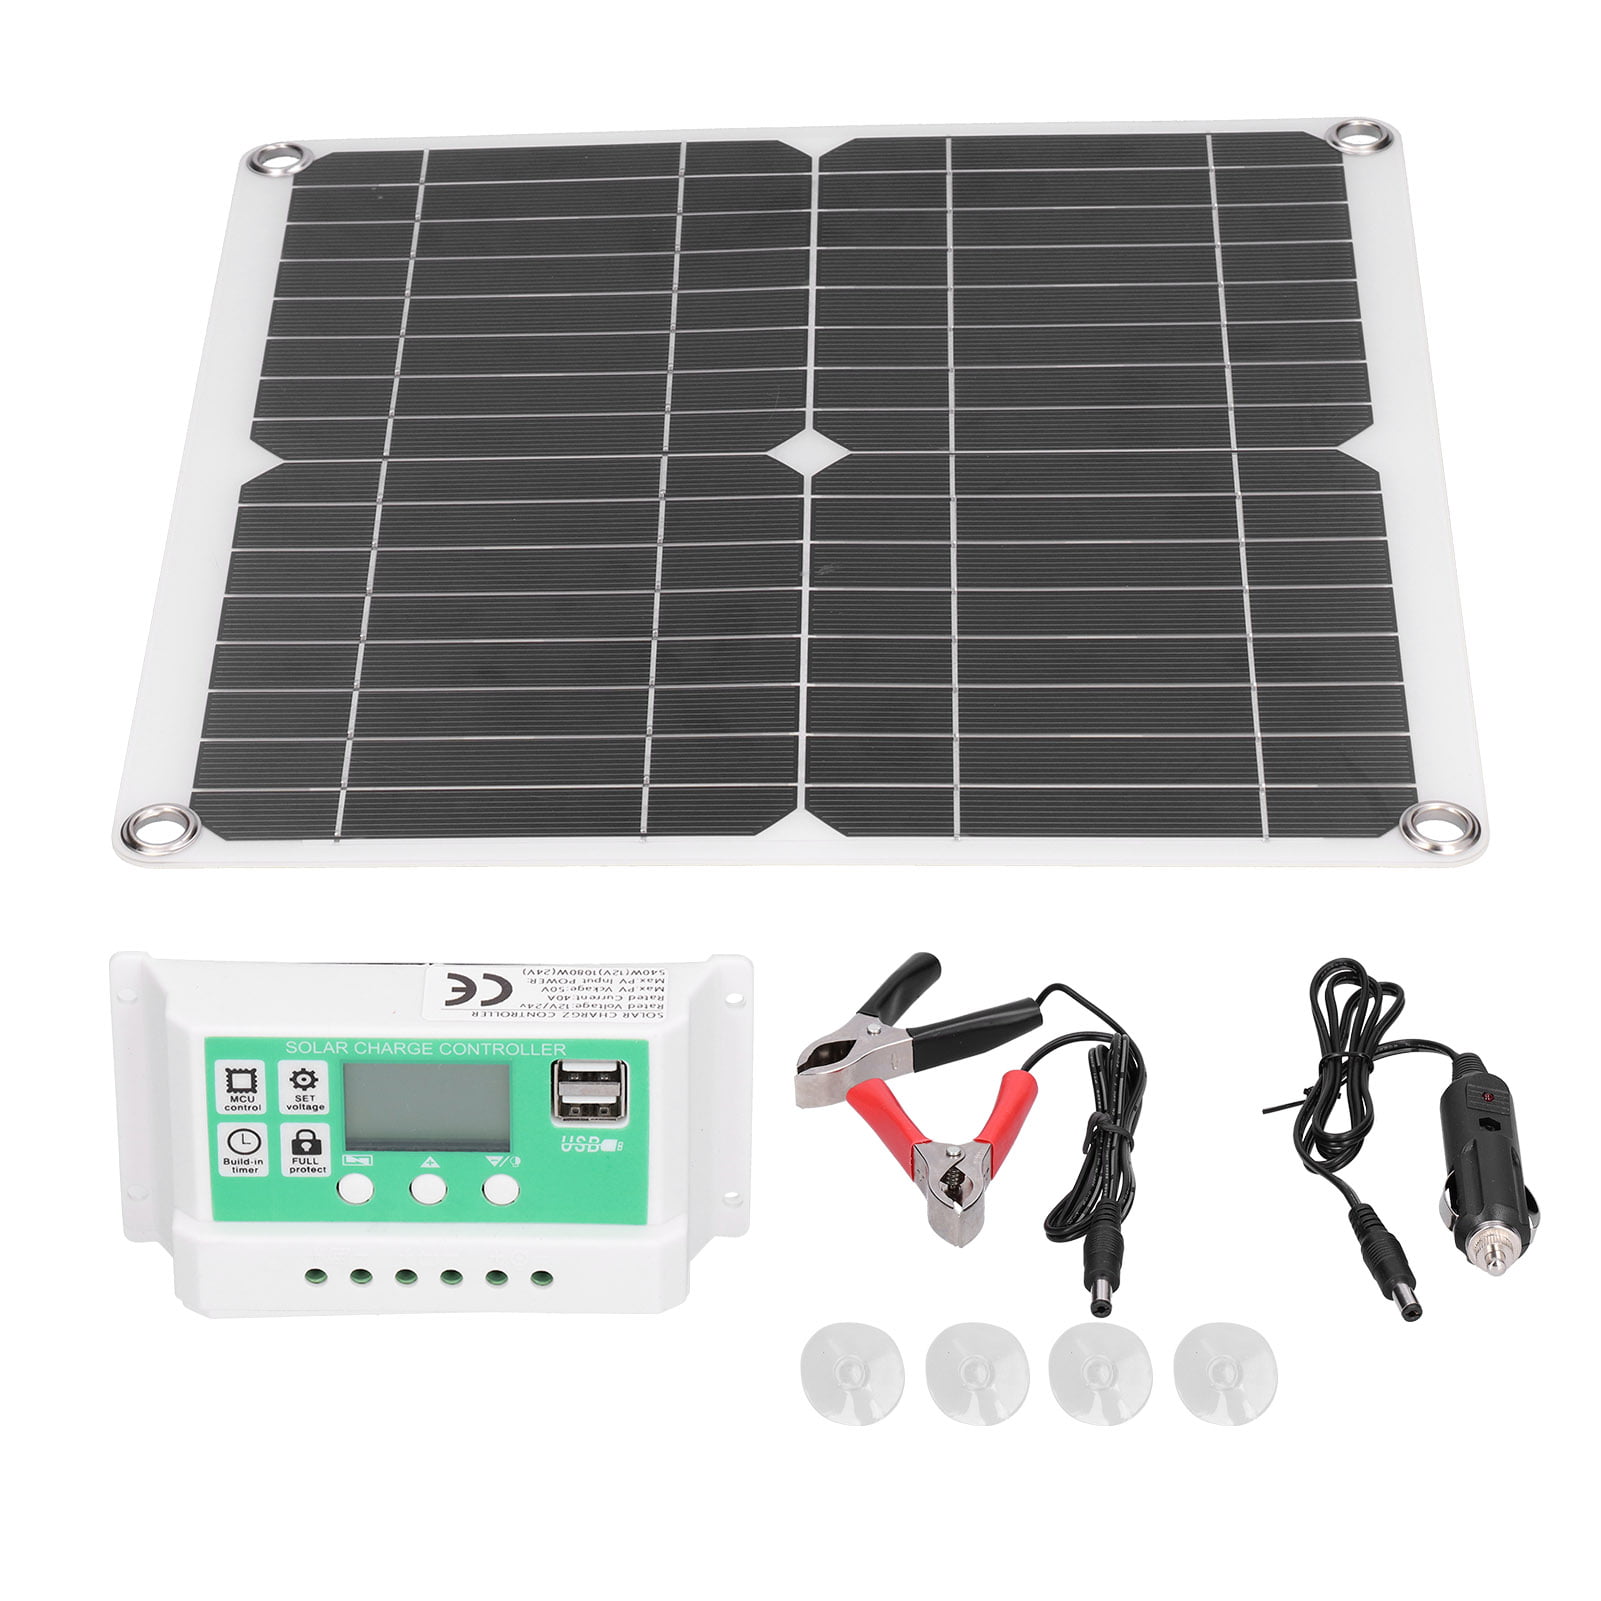 20W 12V Outdoor Car Boat Yacht Solar Panel Battery Supply Power Charger I6M4 